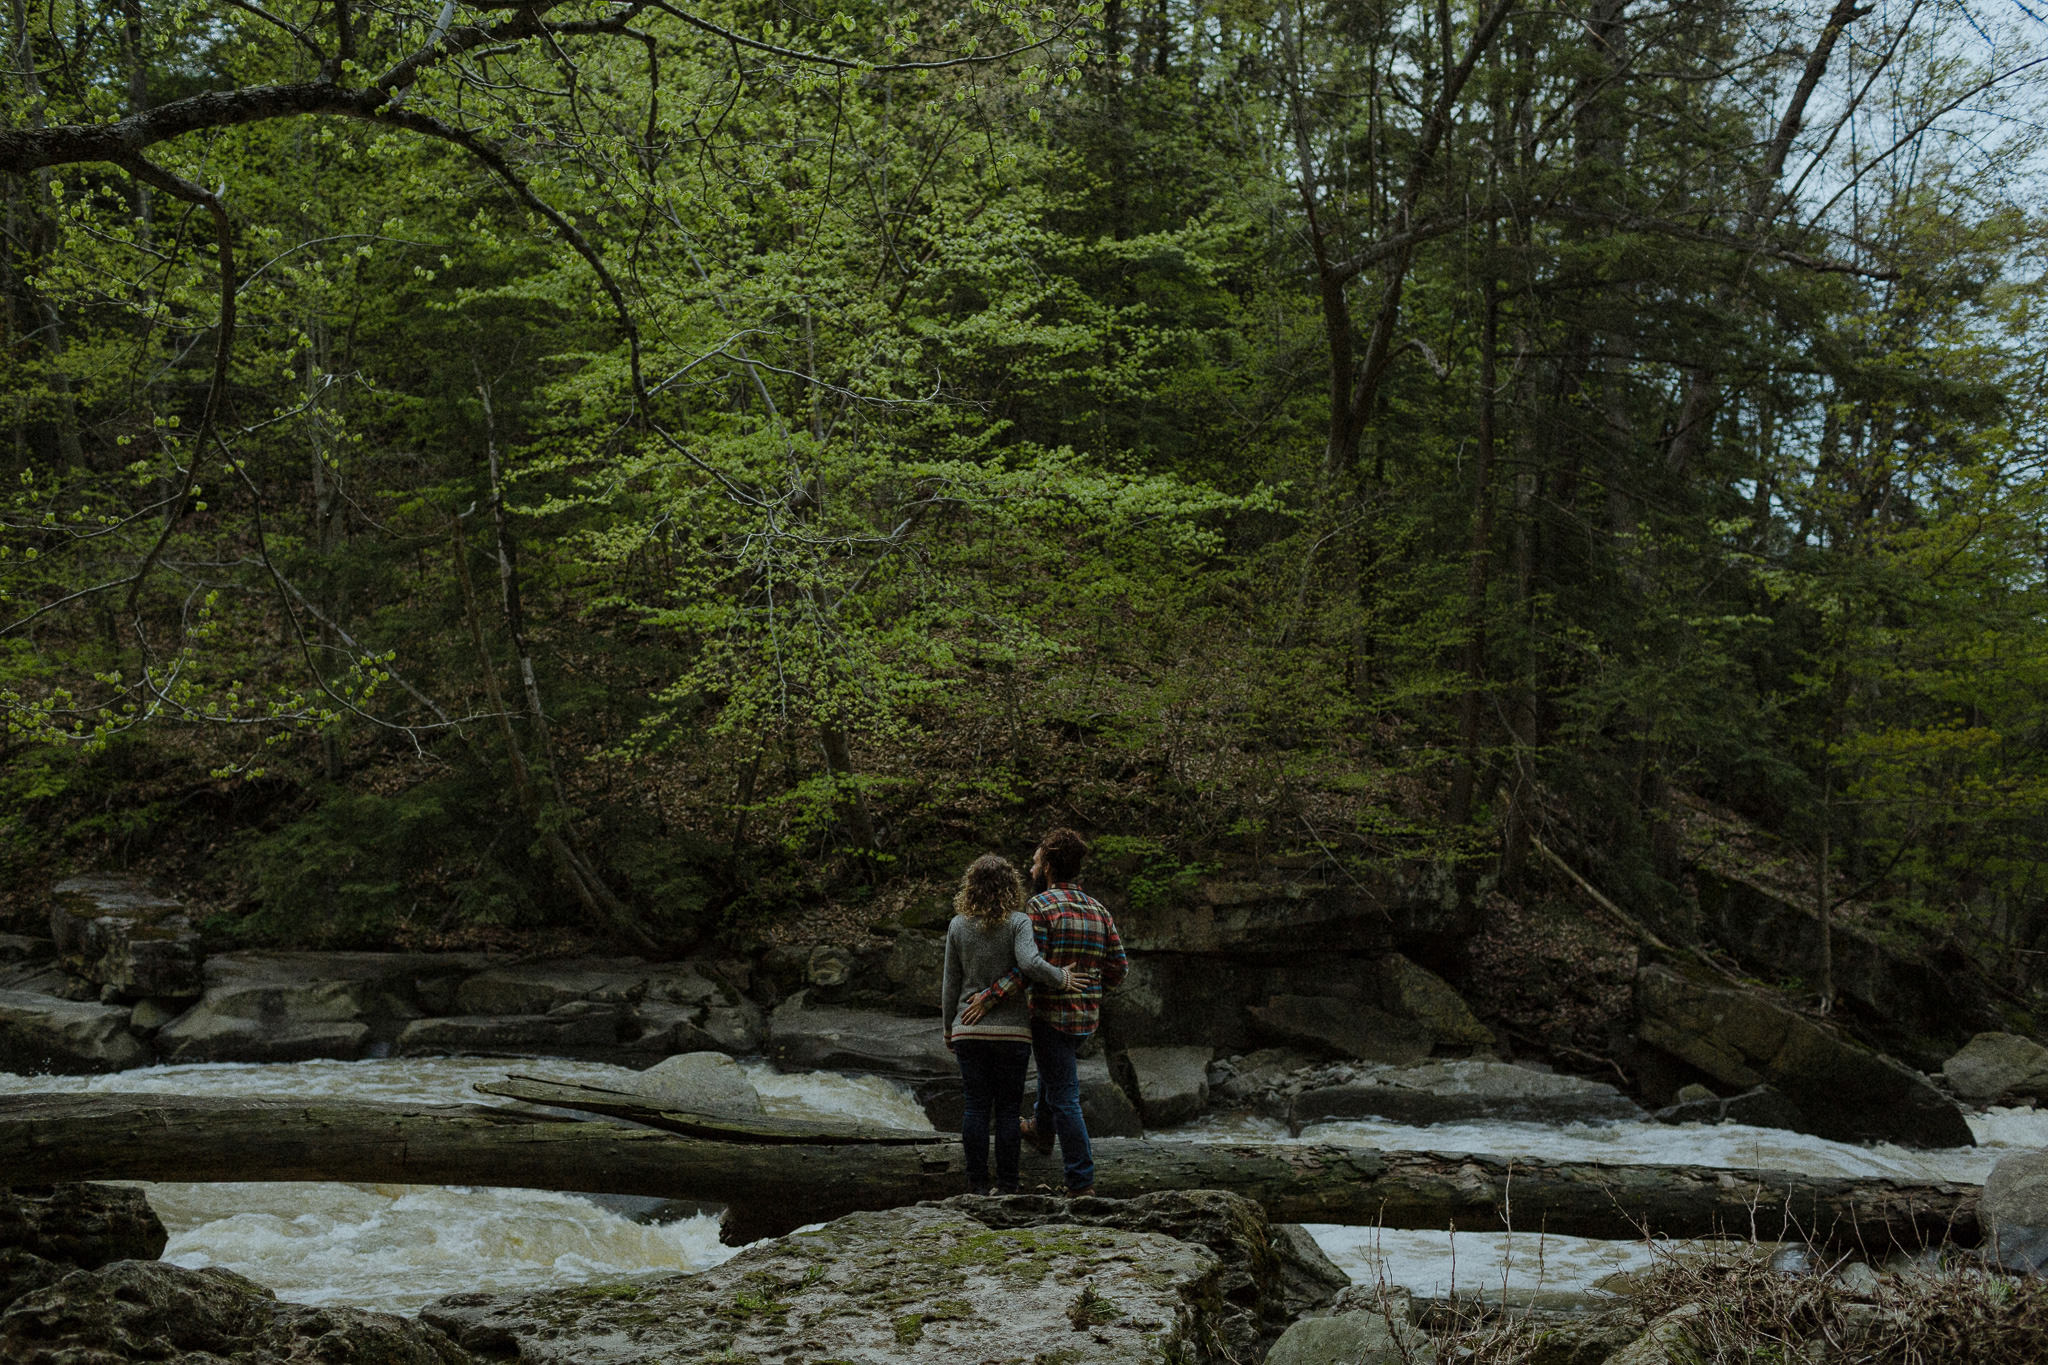 newly engaged couple enjoying the view of the rushing water at lower falls in balls falls conservation area in Niagara